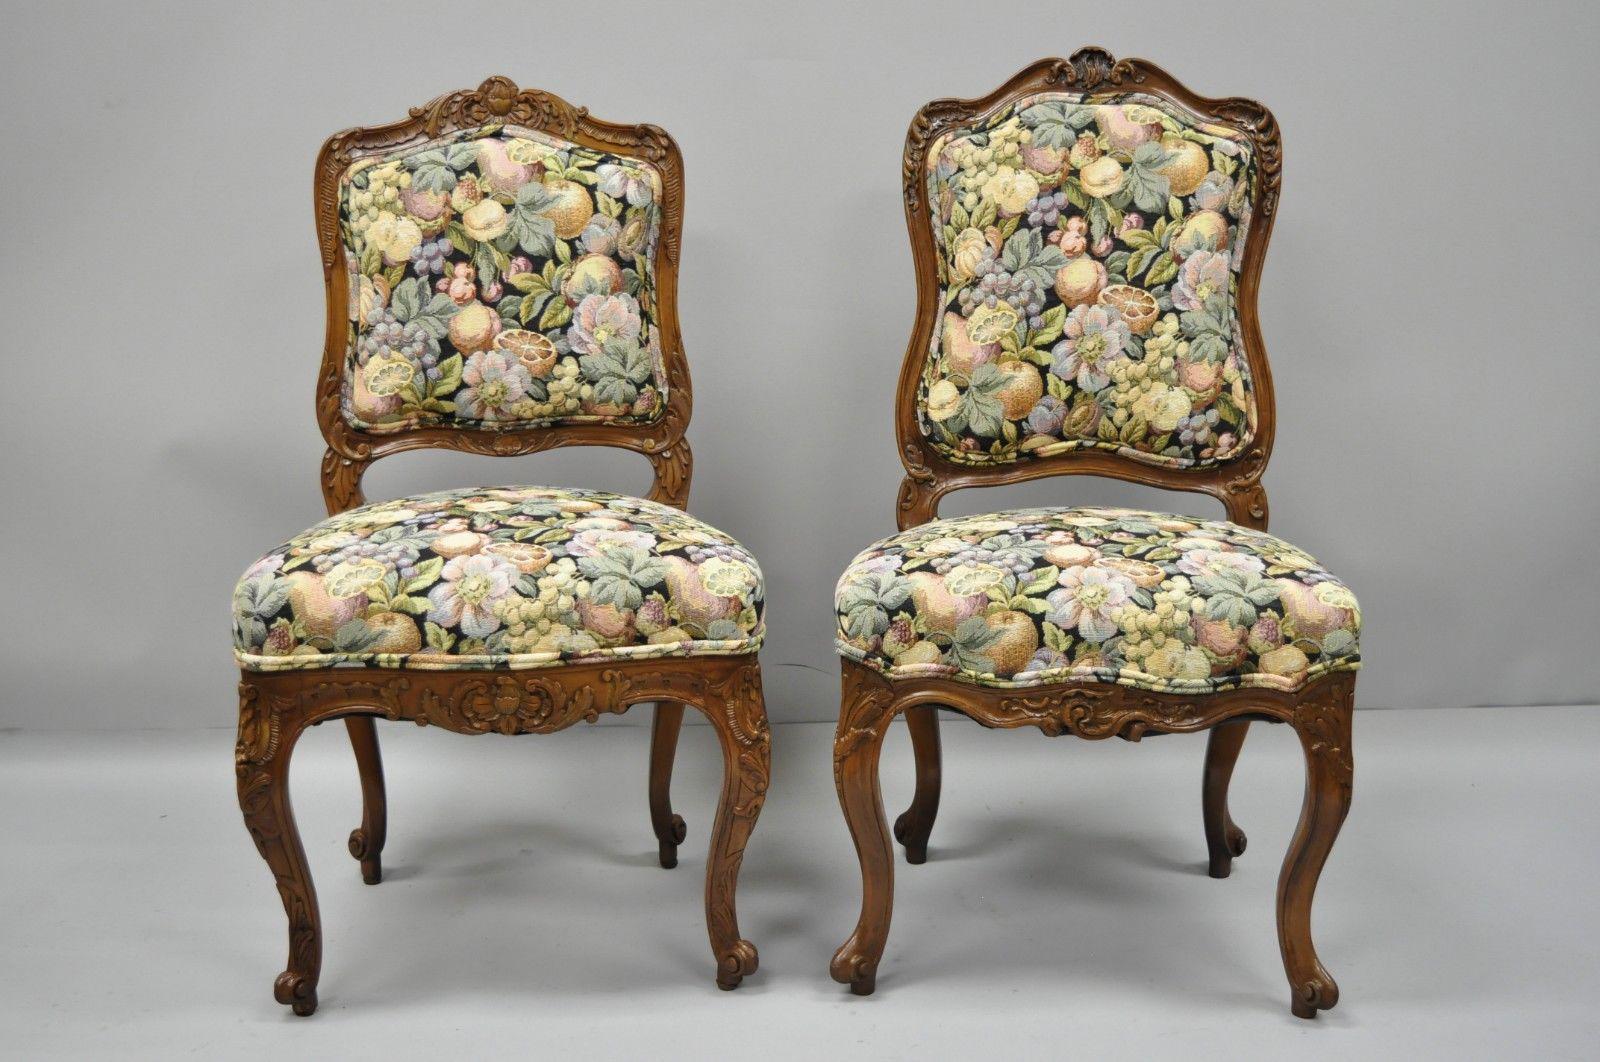 Antique near pair of French Louis XV style carved walnut upholstered side chairs. Listing includes complementary pair with variations in carvings and size, fruit, leaves and flowers printed tapestry fabric, solid wood construction, finely carved